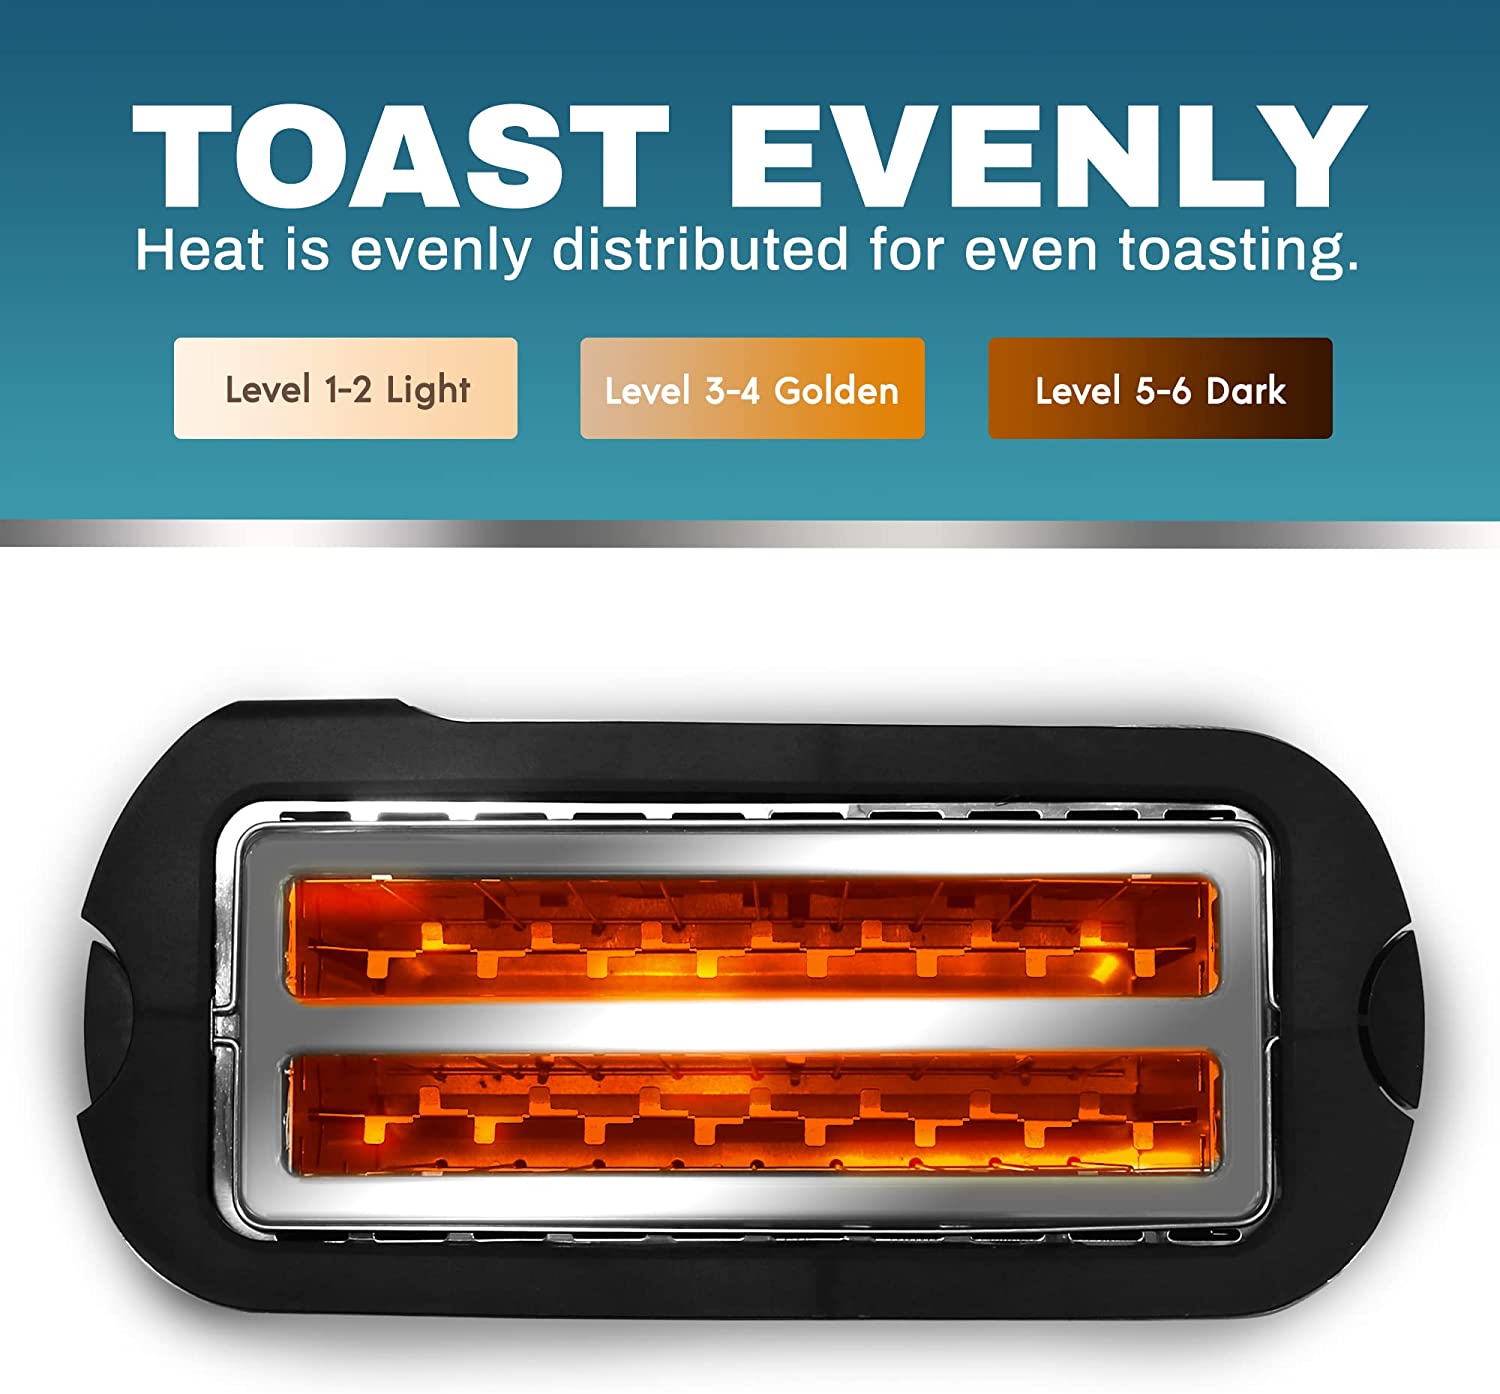 https://discounttoday.net/wp-content/uploads/2022/11/Elite-Gourmet-ECT4400B-Long-Slot-4-Slice-Toaster-Countdown-Timer-Bagel-Function-6-Toast-Setting-Defrost-Cancel-Function-Built-in-Warming-Rack-Extra-Wide-Slots-for-Bagel-Waffle-Stainless-Steel7.jpg